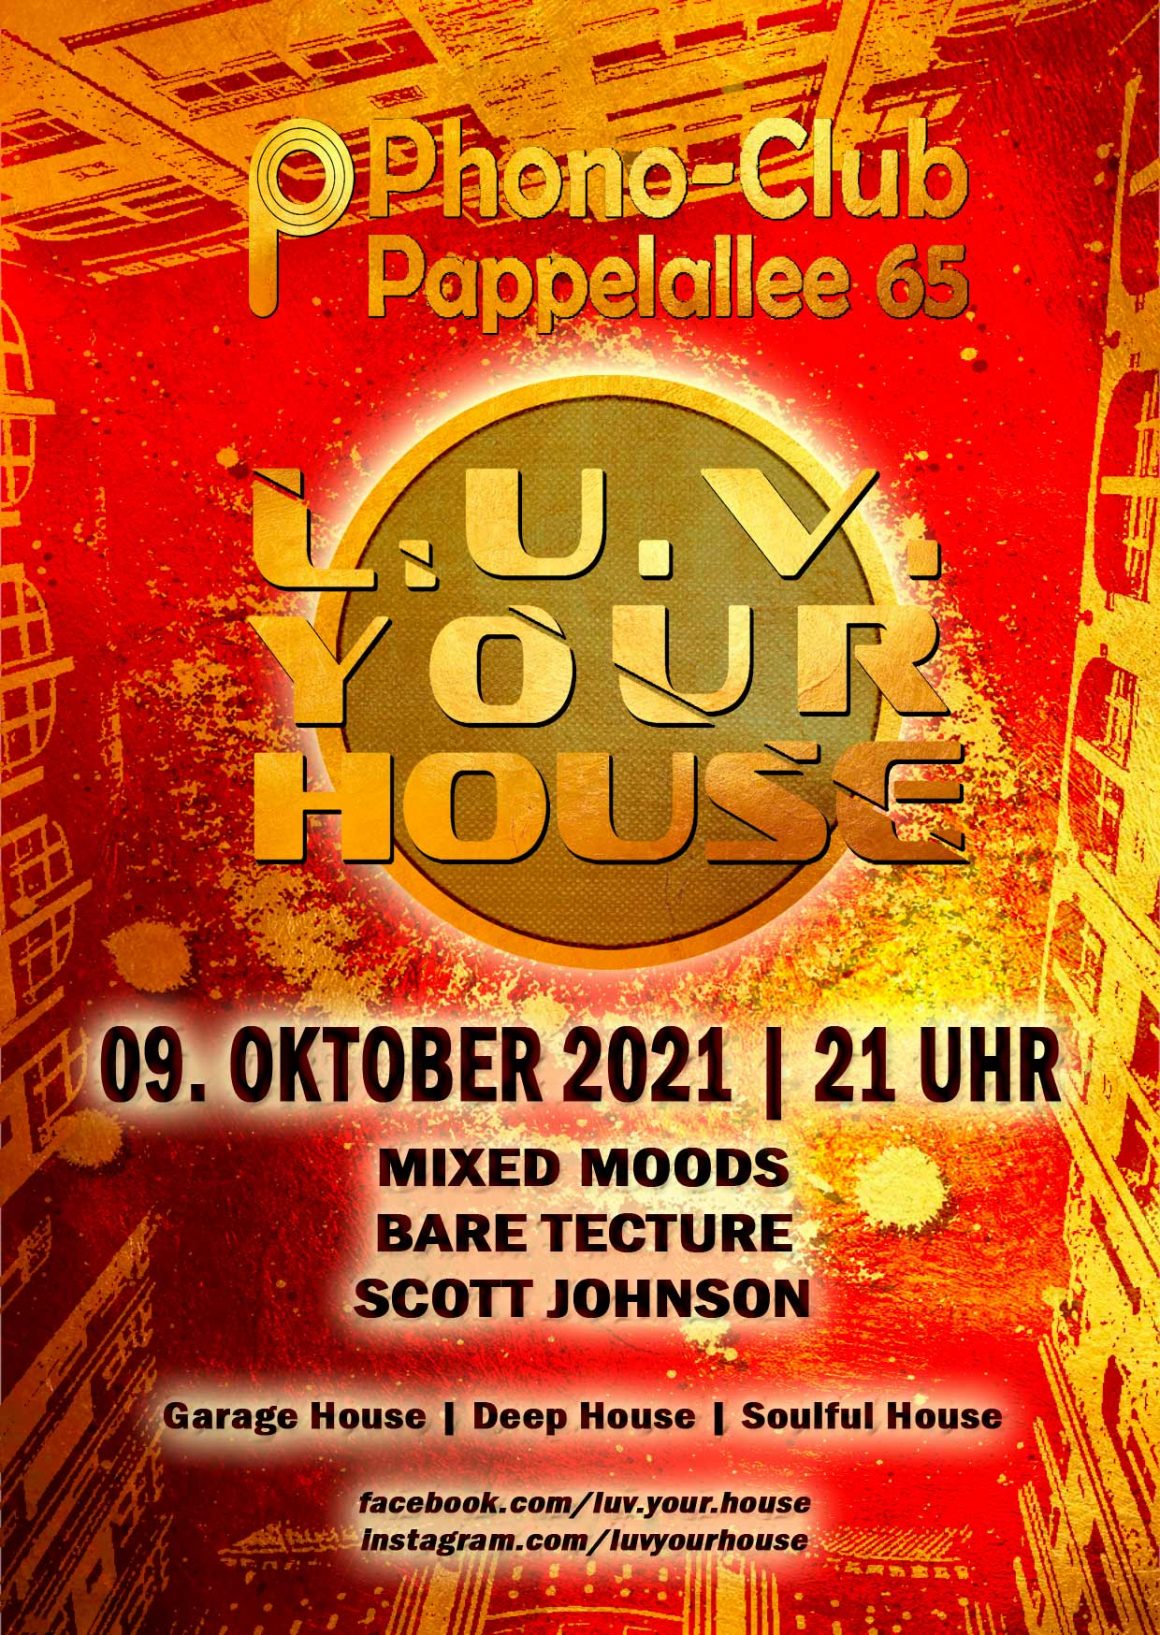 LUV YOUR HOUSE 09.10.2021 @ Phono Club, Berlin